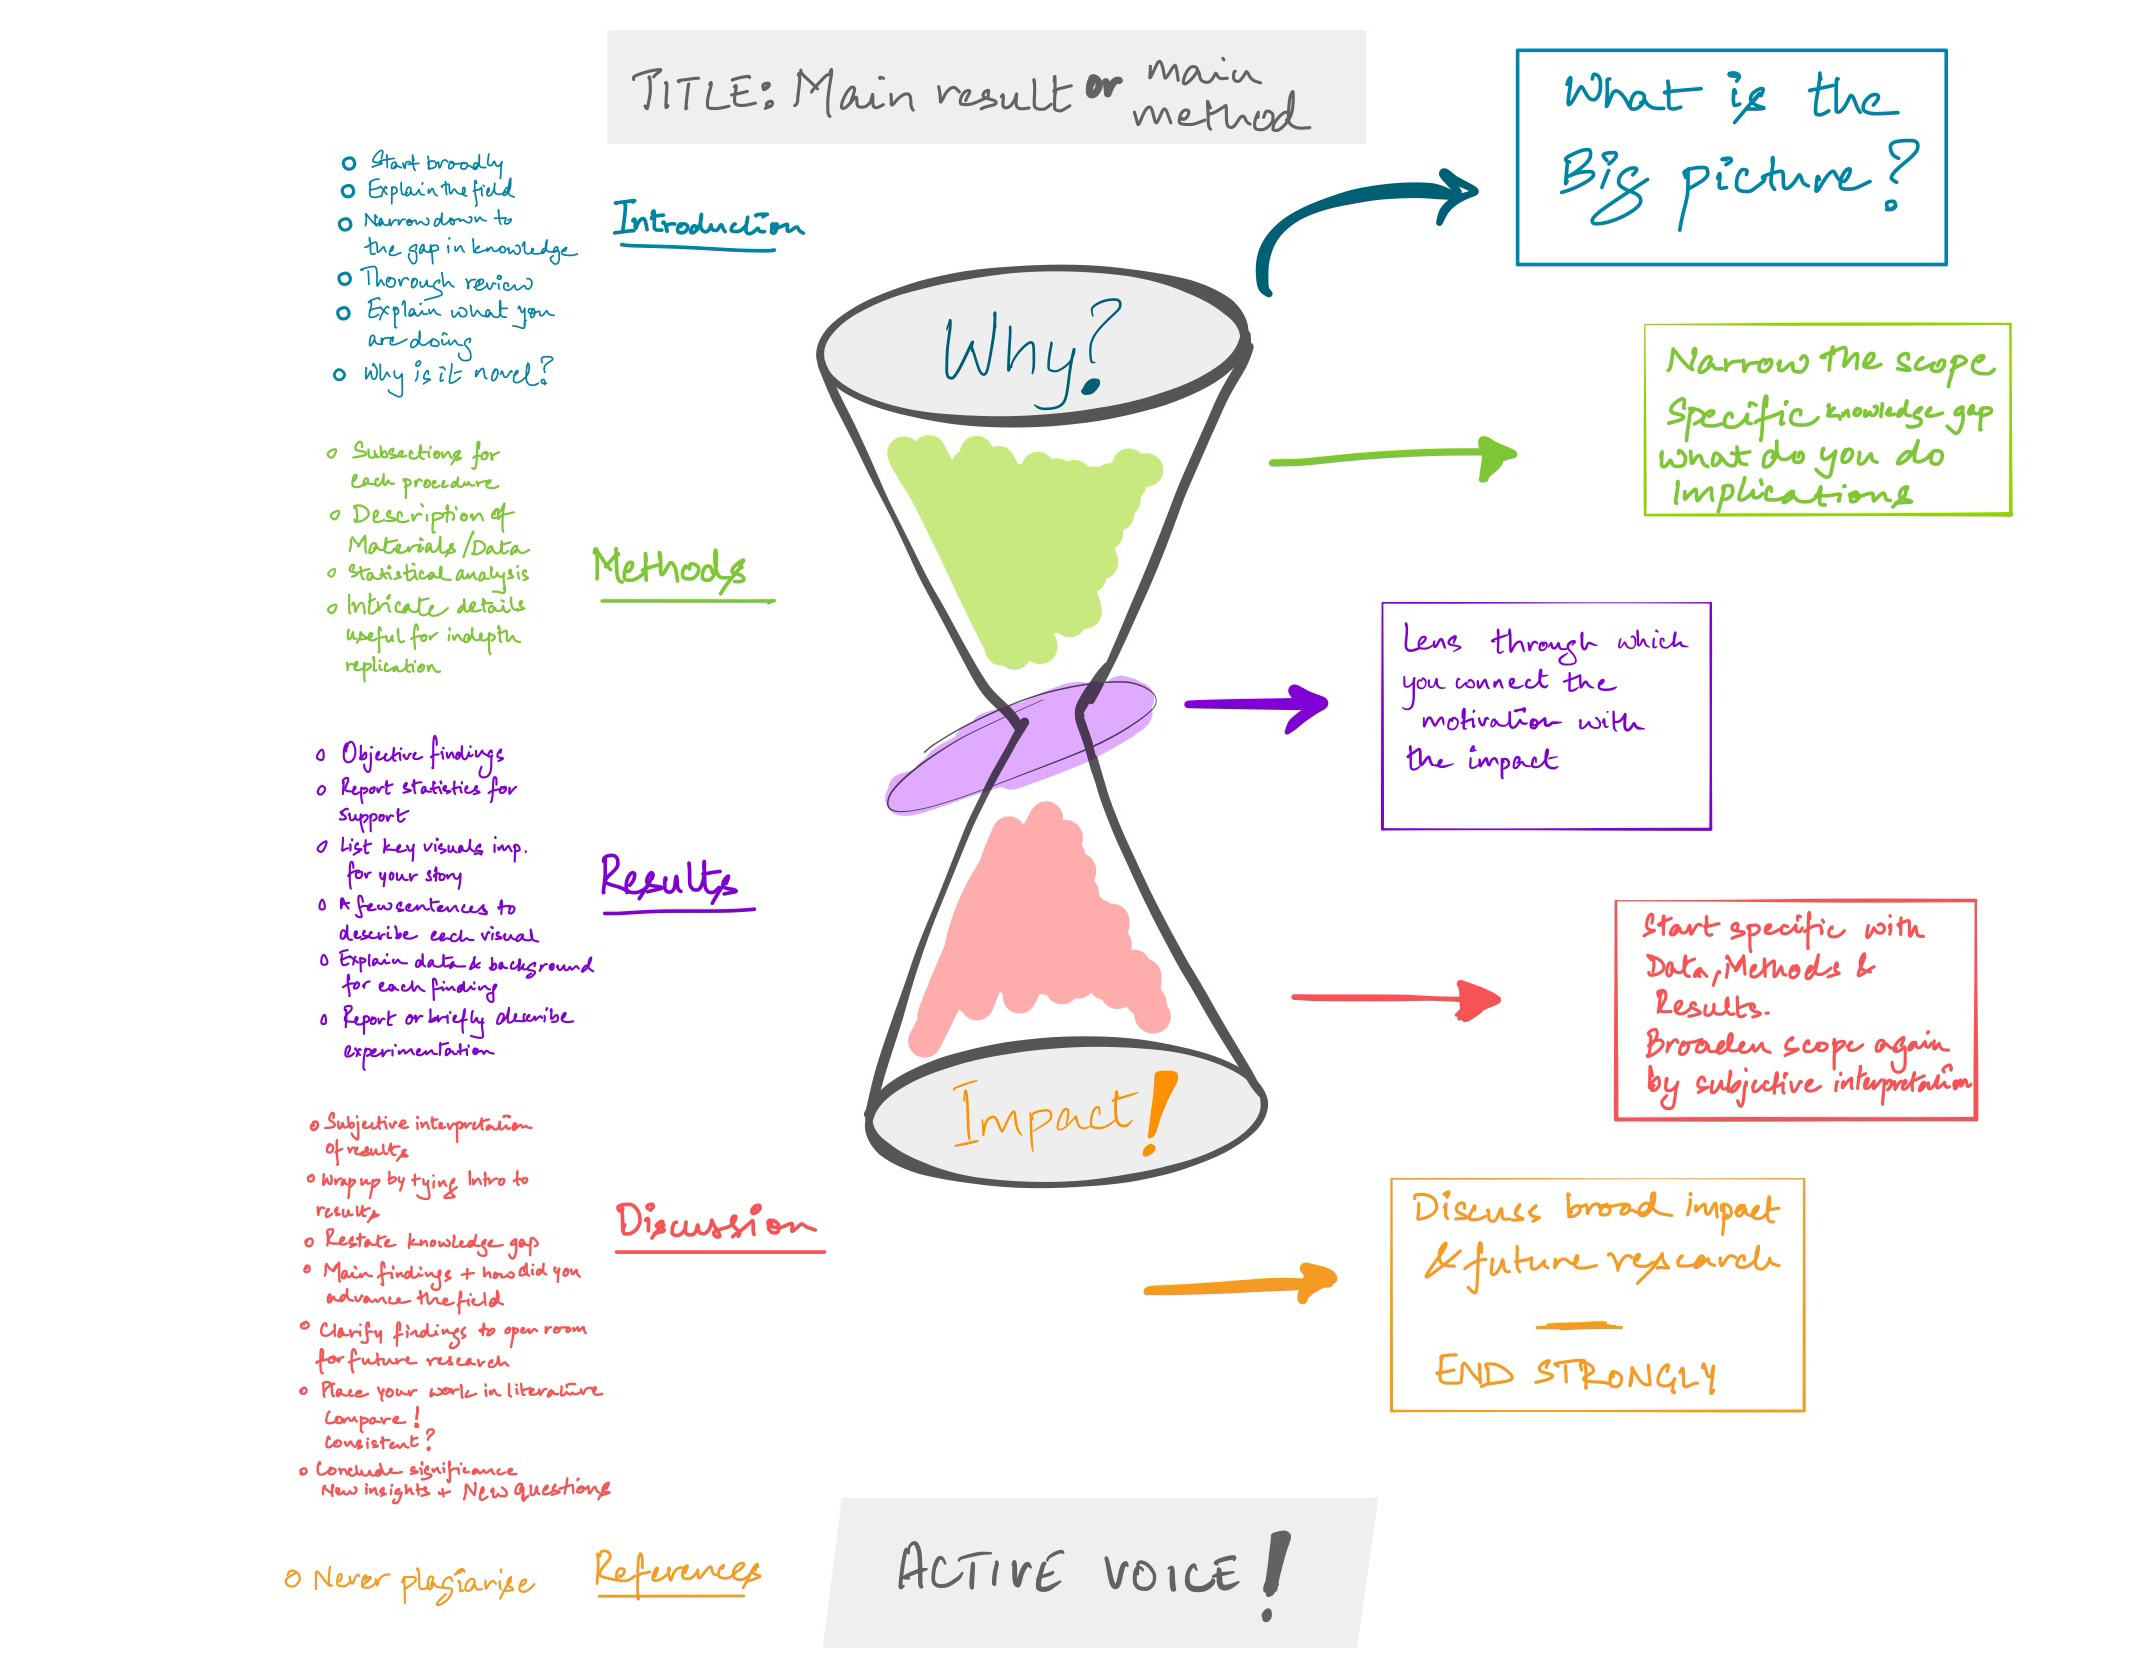 Figure 1. The illustration of the hourglass framework shows how content flows from top to bottom of a scientific article. The left of the image shows pointers for each section and the right side describes the philosophy of the framework itself. The colour coding from left to right is not necessarily matched by section to philosophy but is a guiding hand.